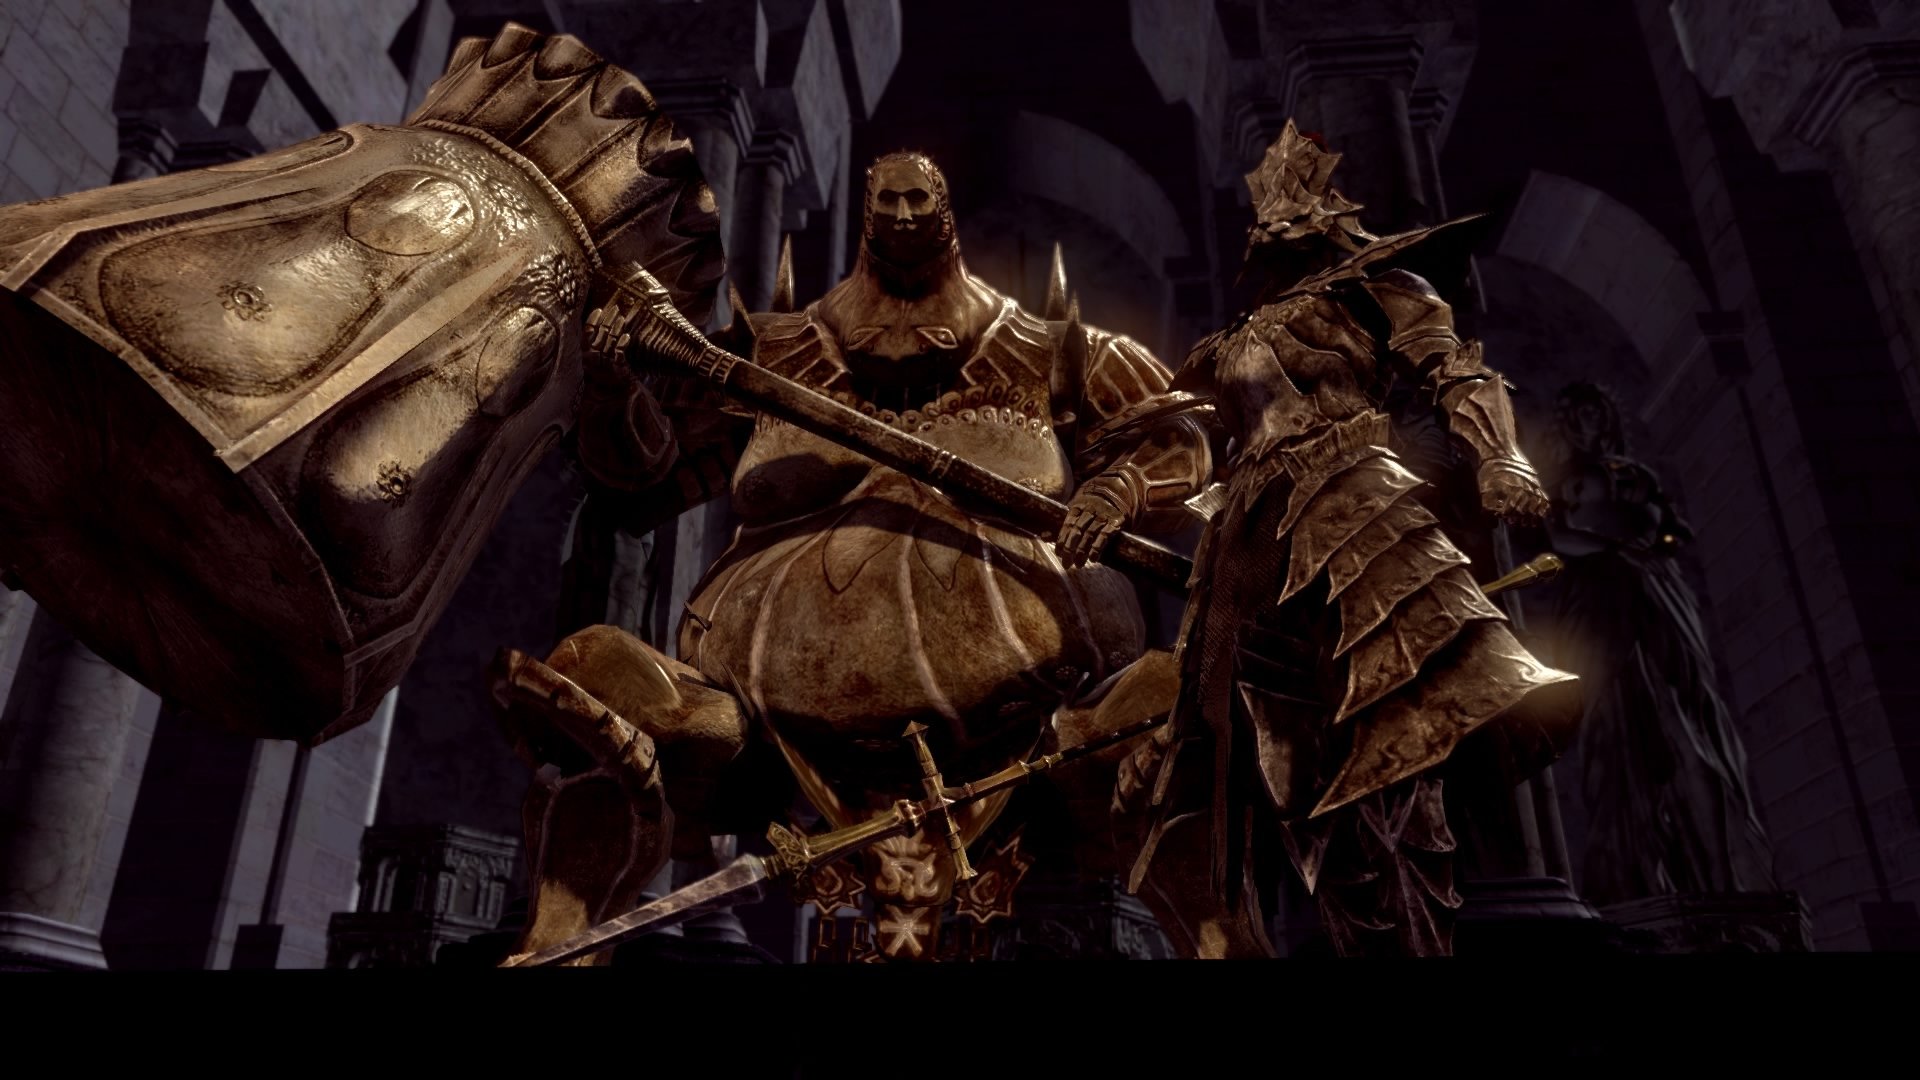 ornstein_and_smough_introduction.jpg